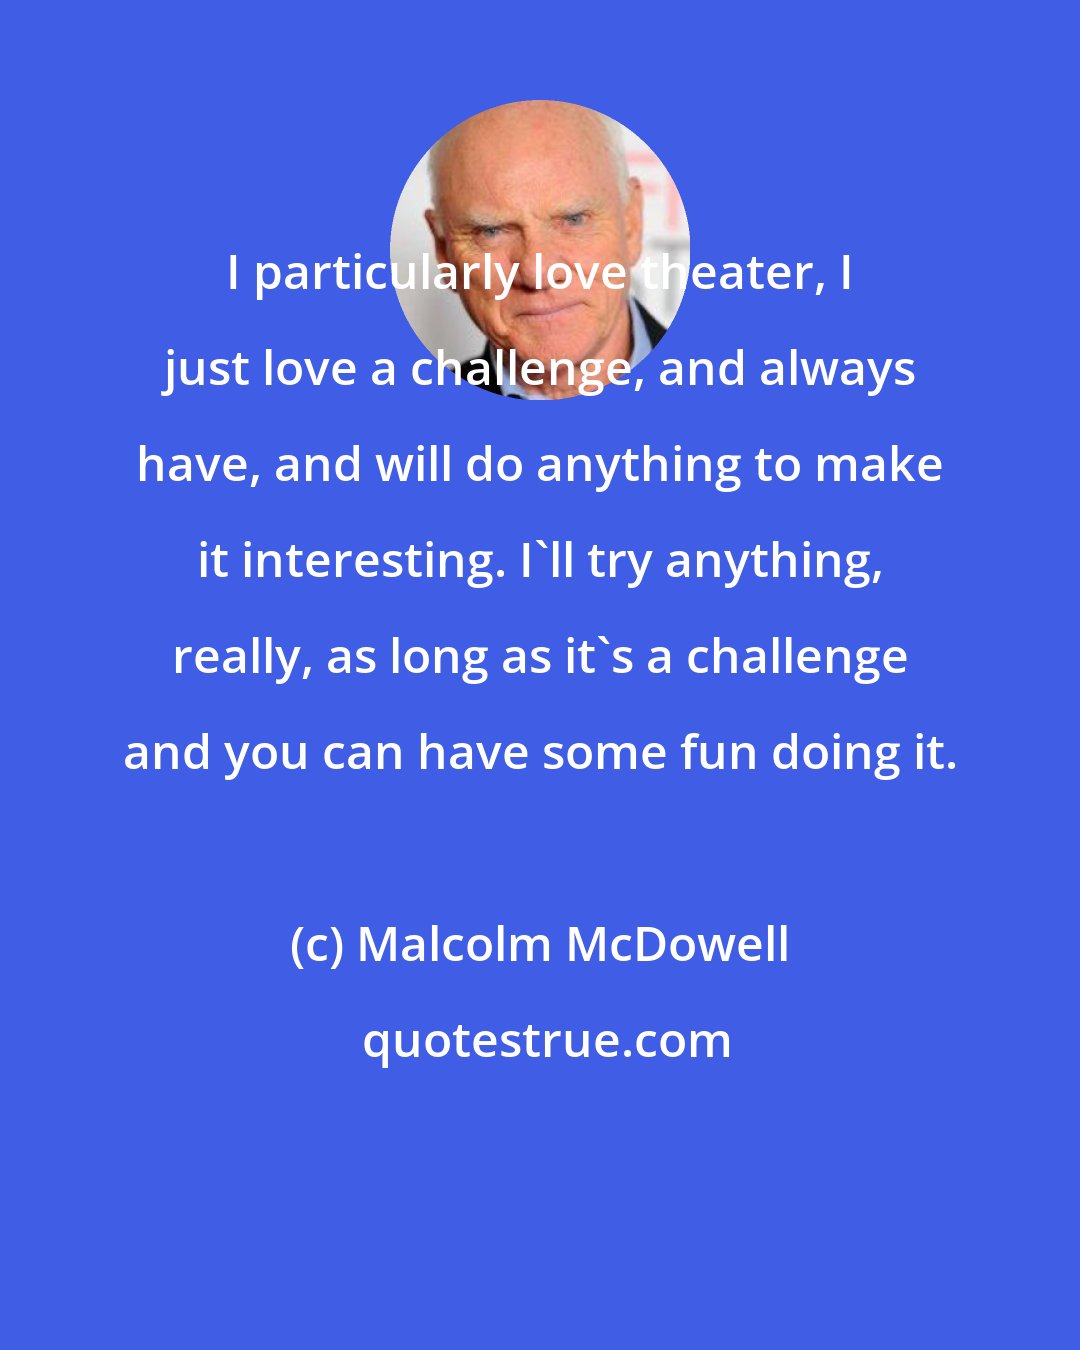 Malcolm McDowell: I particularly love theater, I just love a challenge, and always have, and will do anything to make it interesting. I'll try anything, really, as long as it's a challenge and you can have some fun doing it.